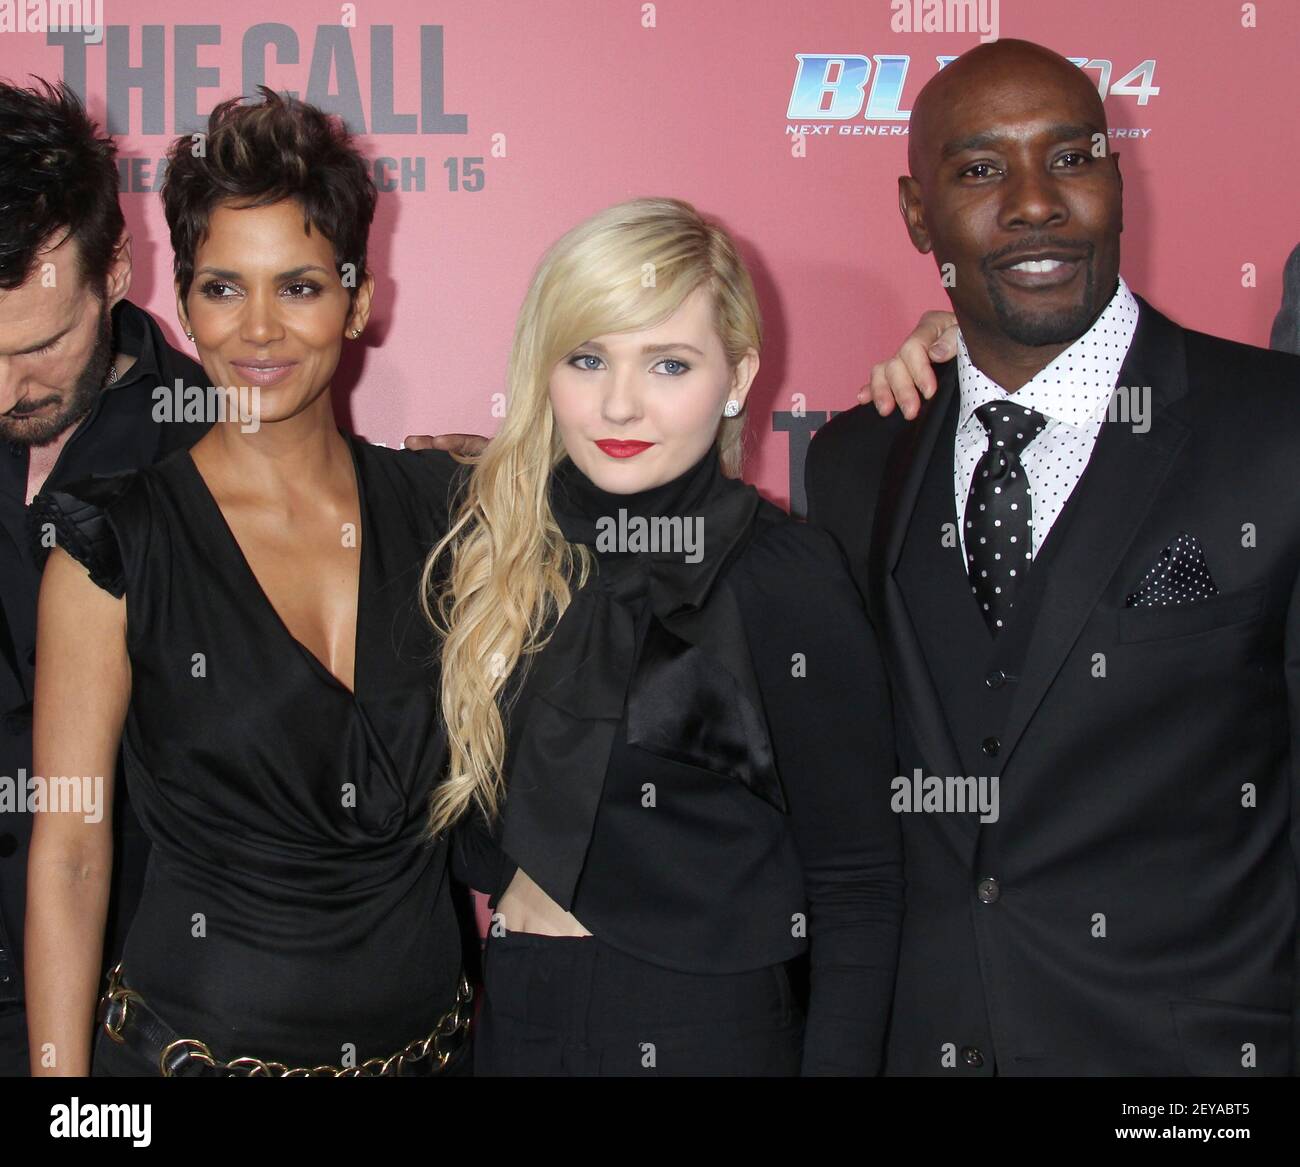 05 March 2013 - Hollywood, California - Halle Berry, Morris Chestnut ...